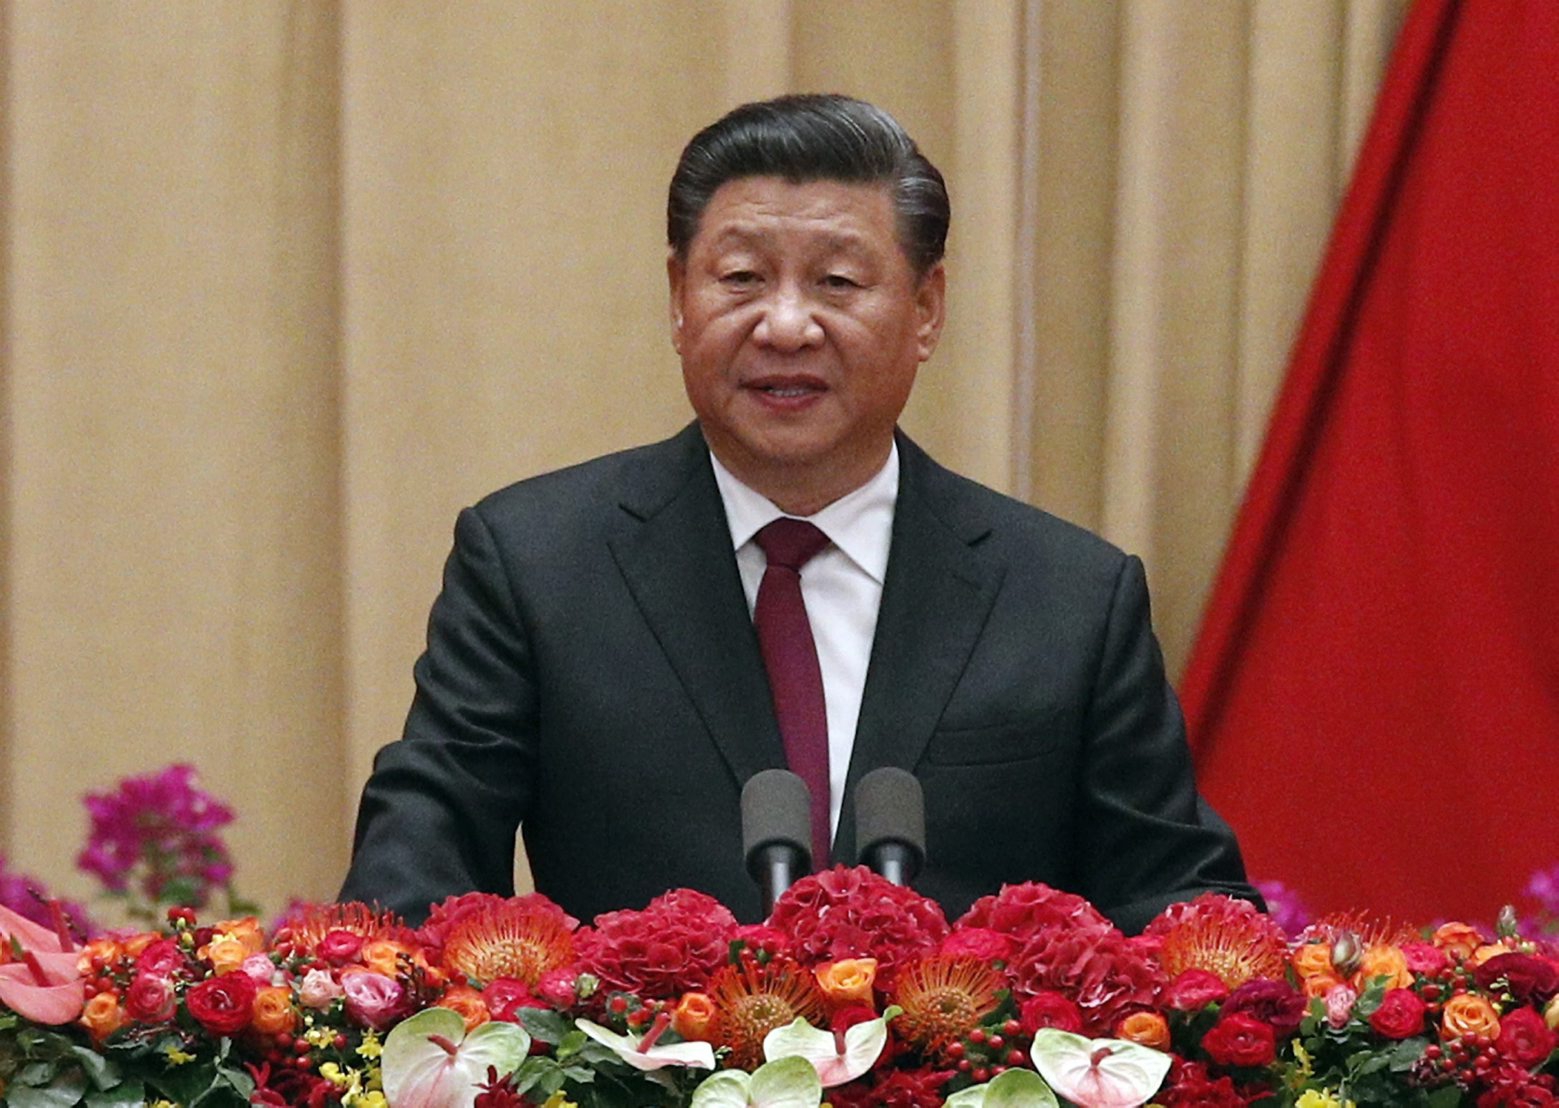 FILE - In this Sept. 30, 2019, file photo, Chinese President Xi Jinping speaks at a dinner marking the 70th anniversary of the founding of the People's Republic of China at the Great Hall of the People in Beijing. BEIJING (AP) â?? China's ruling Communist Party is holding a key meeting amid a drastically slowing economy, ongoing protests in Hong Kong and pushback abroad against Beijing's global ambitions. (AP Photo/Andy Wong, File)
Xi Jinping China Politics